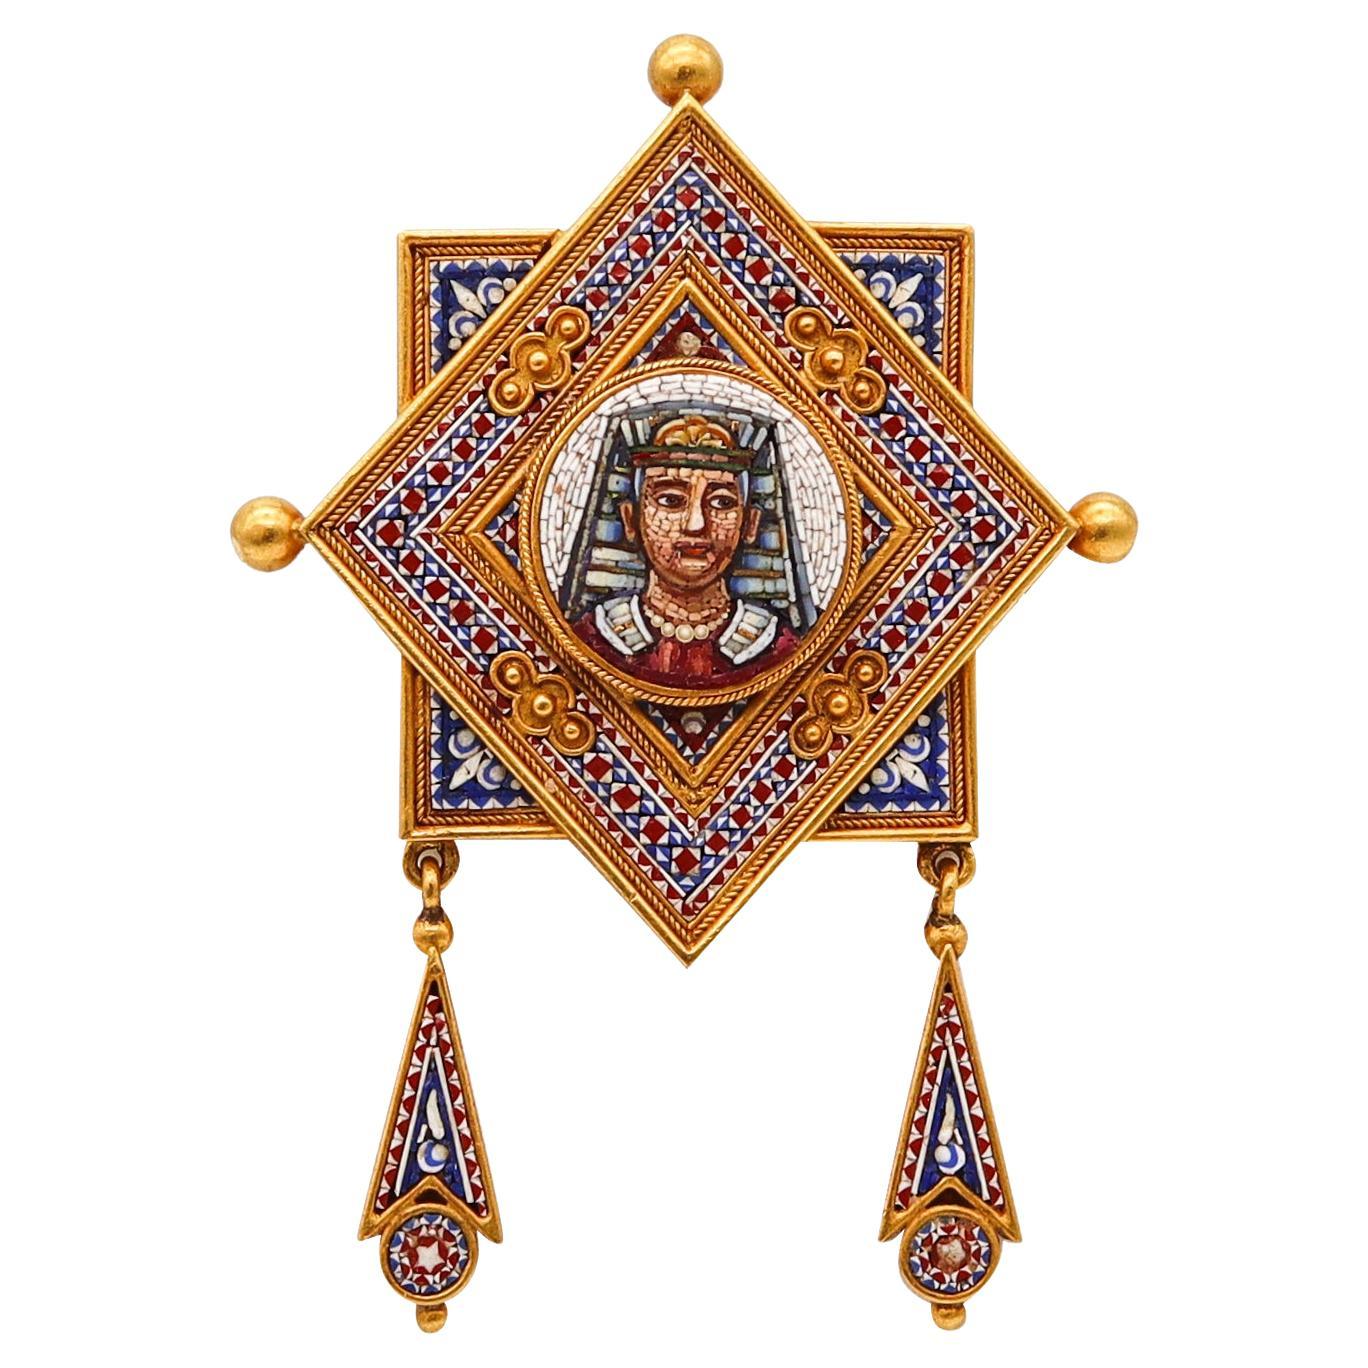 Italie 1850 Roma Papal States Egyptian Revival Pendentif en or 18 carats